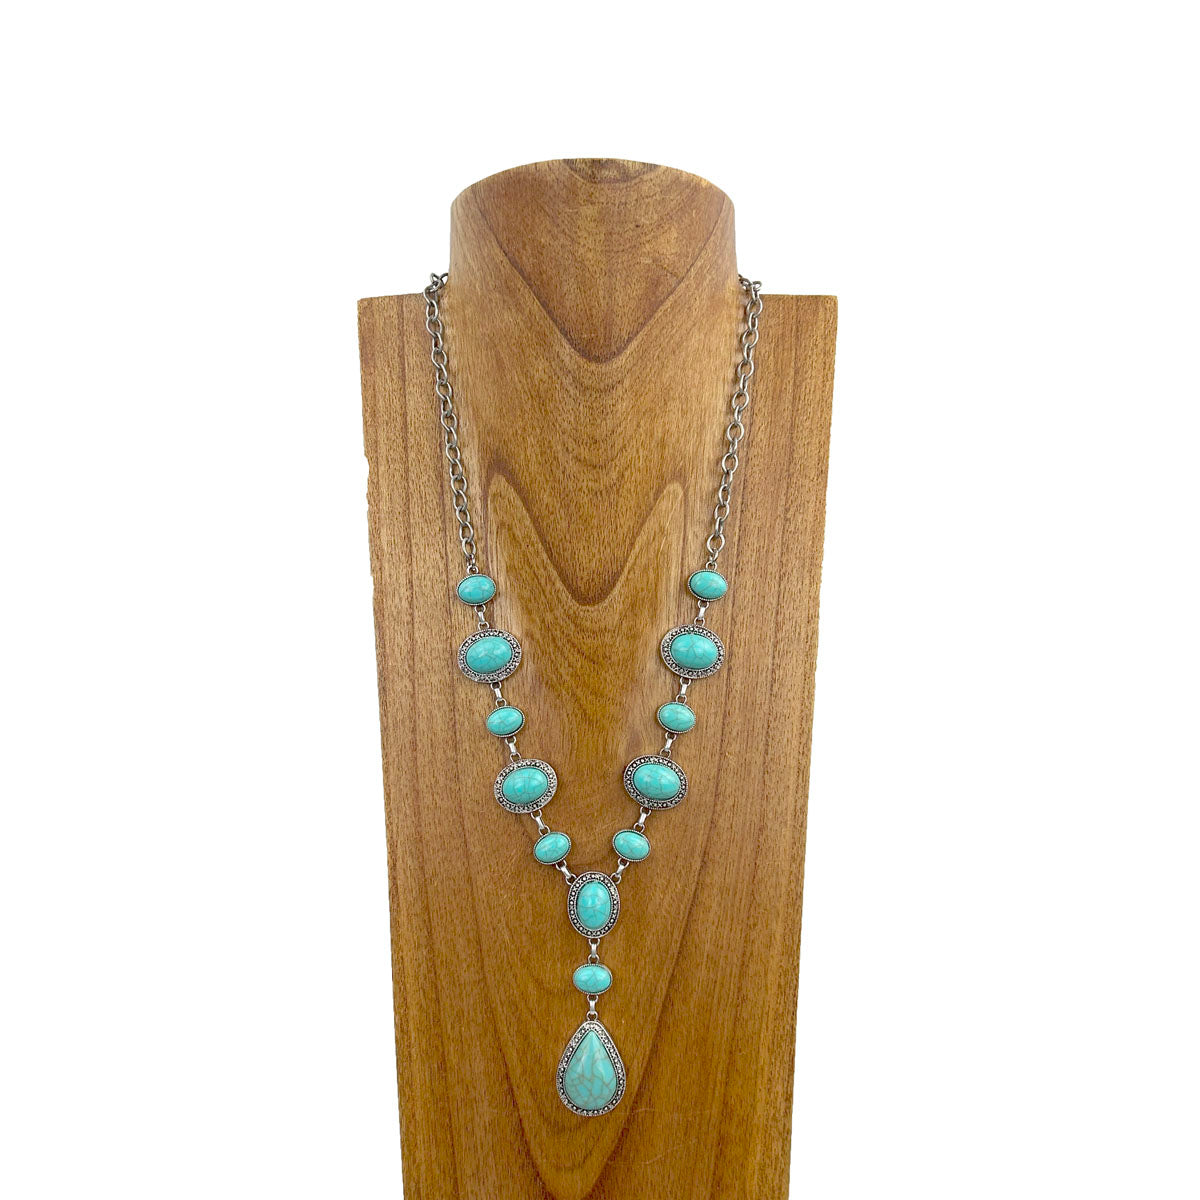 NKY230910-11-BLUE                  26 inches silver metal chain with blue turquoise stone" Y" shape Necklace